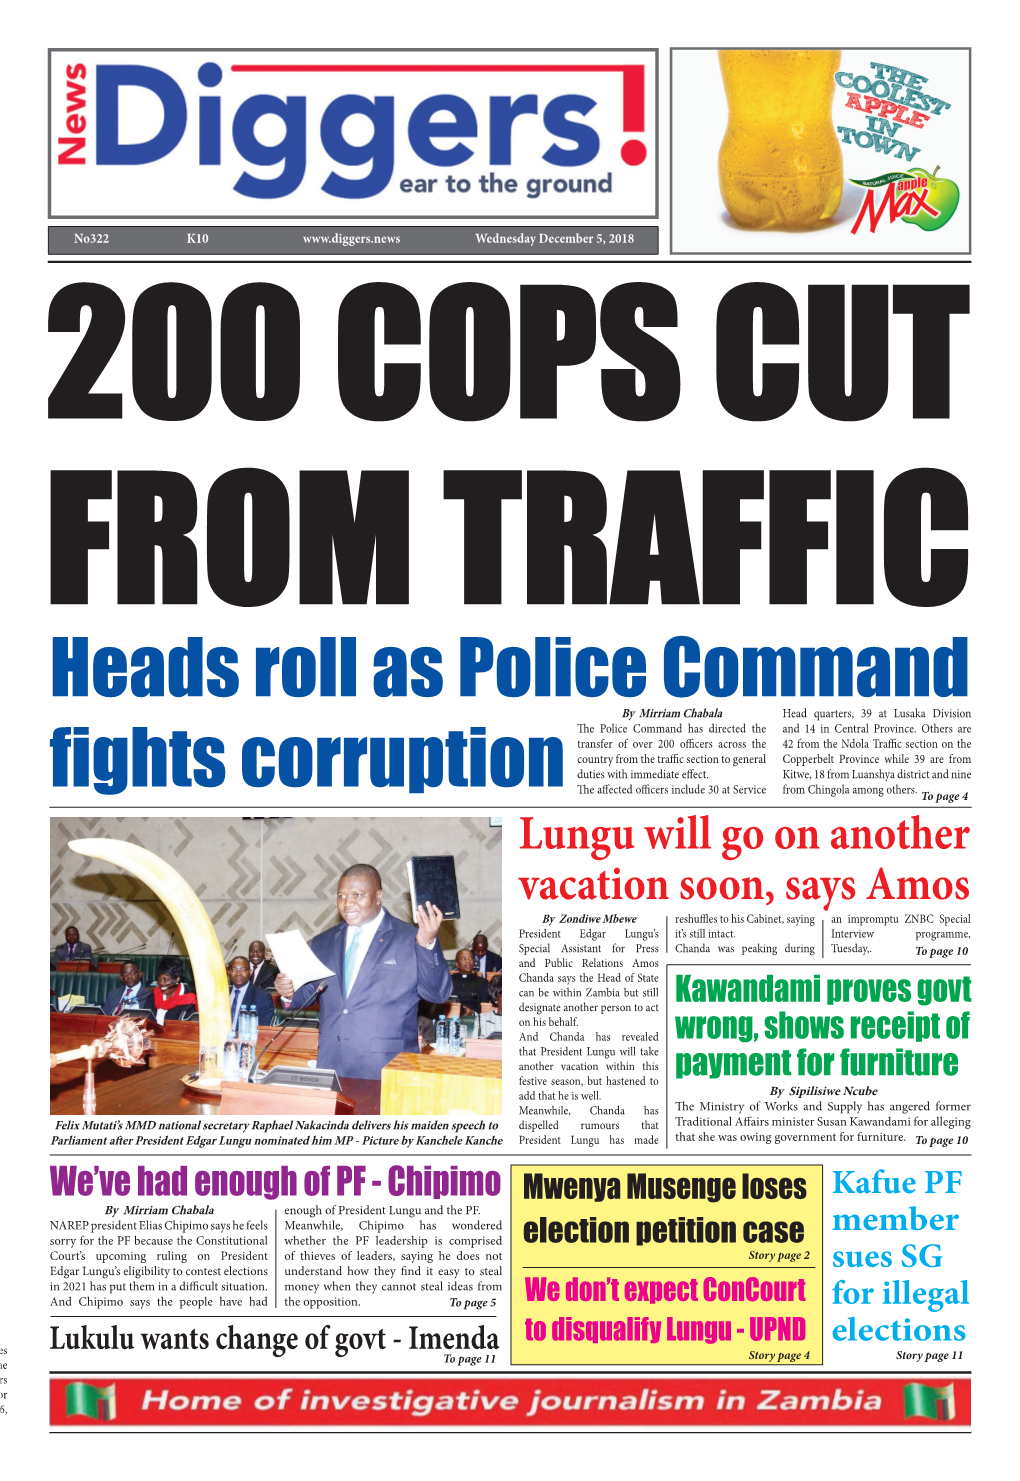 Heads Roll As Police Command Fights Corruption